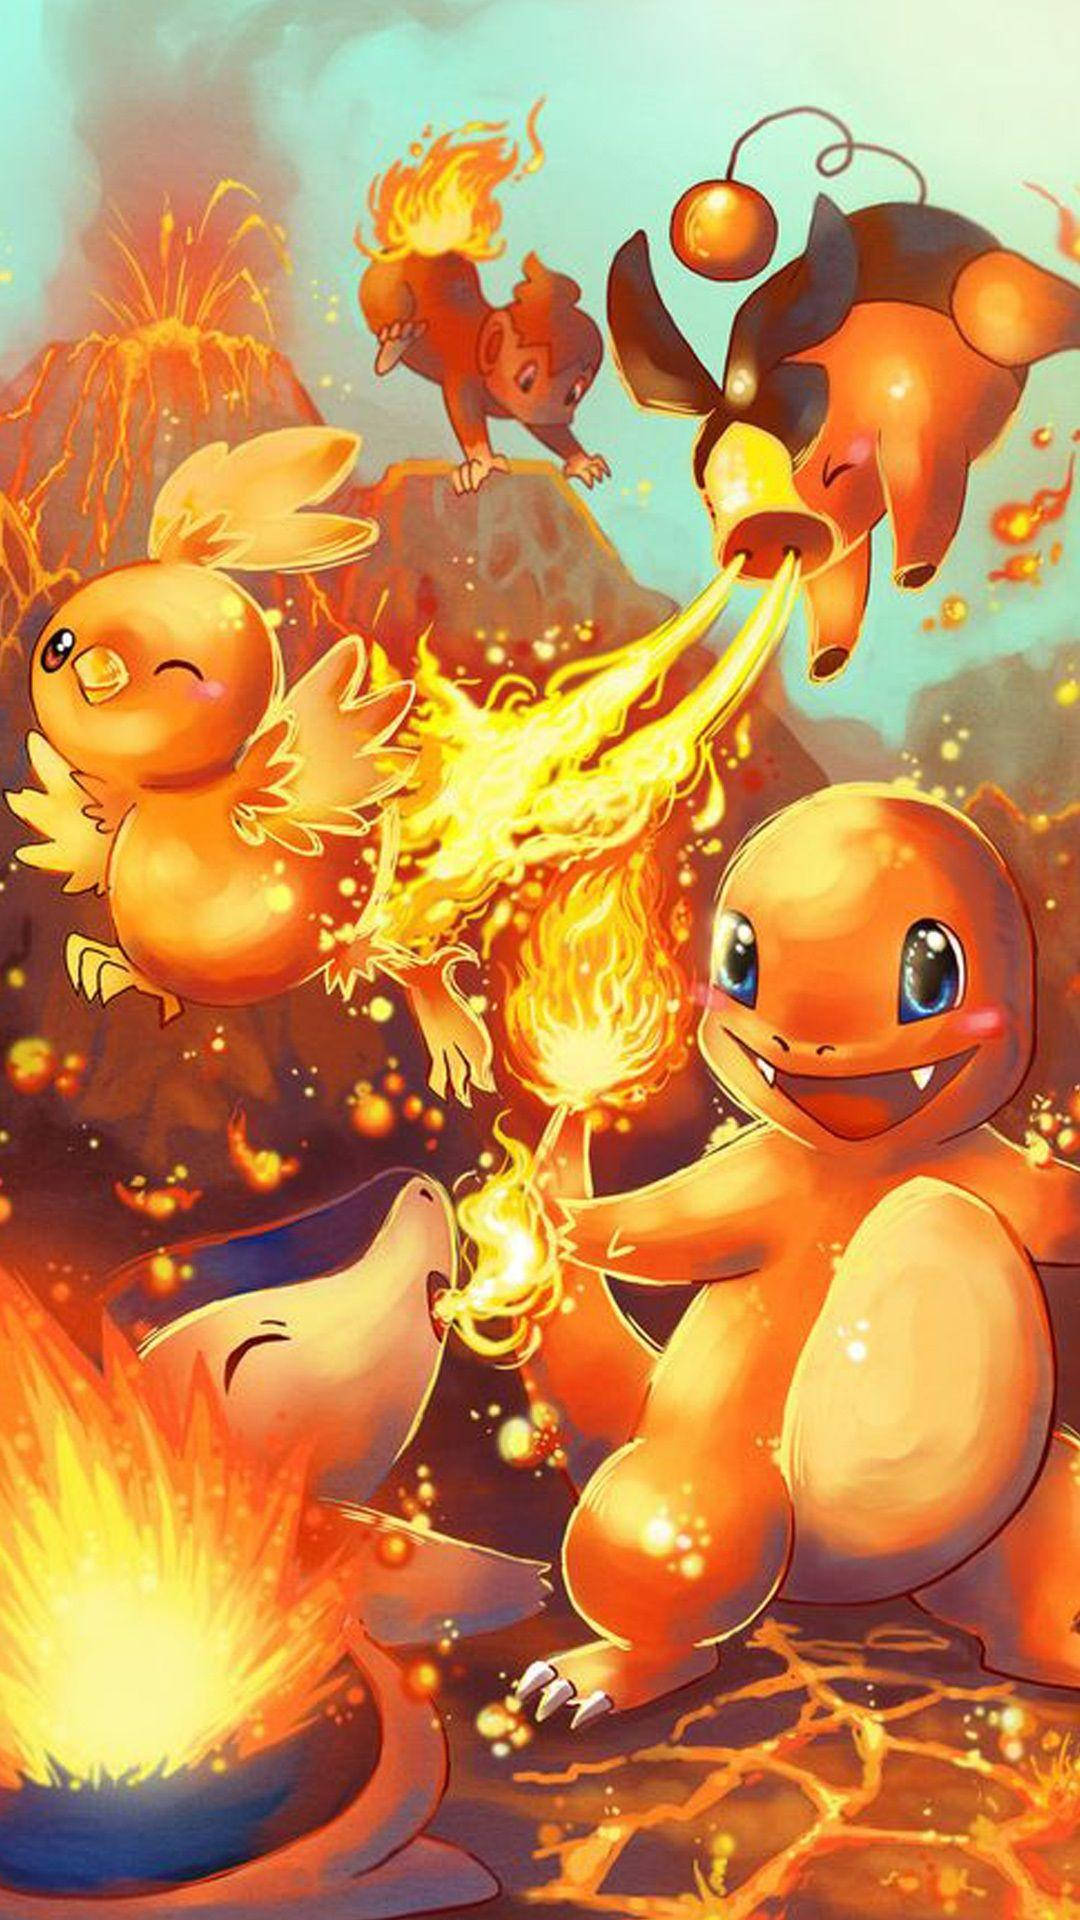 Put Out The Fire With Charmander!